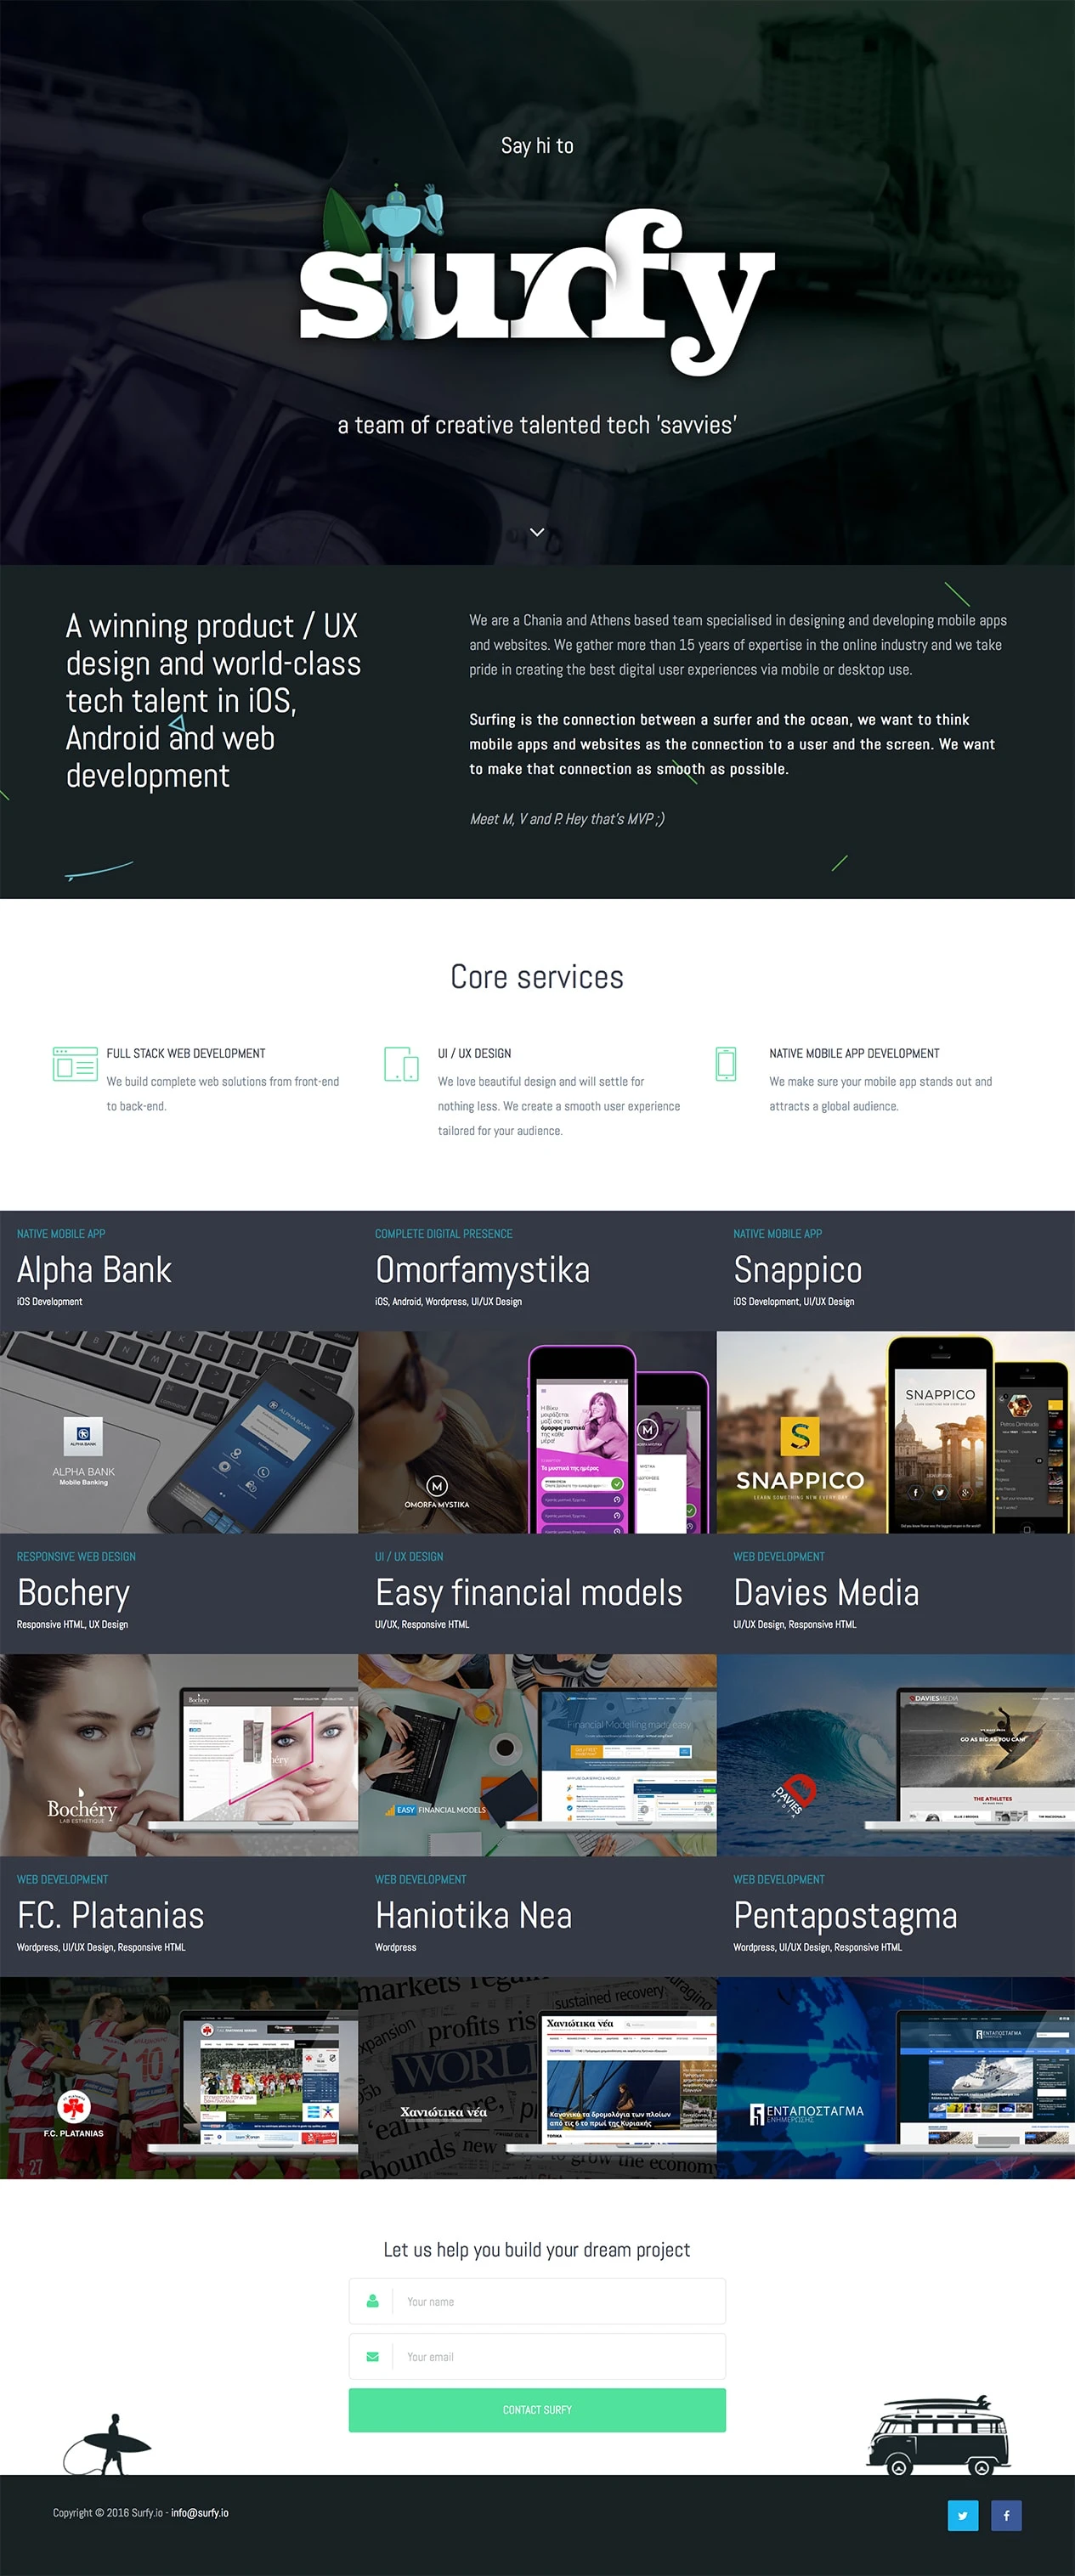 Surfy Landing Page Example: A team of creative talented tech savvies